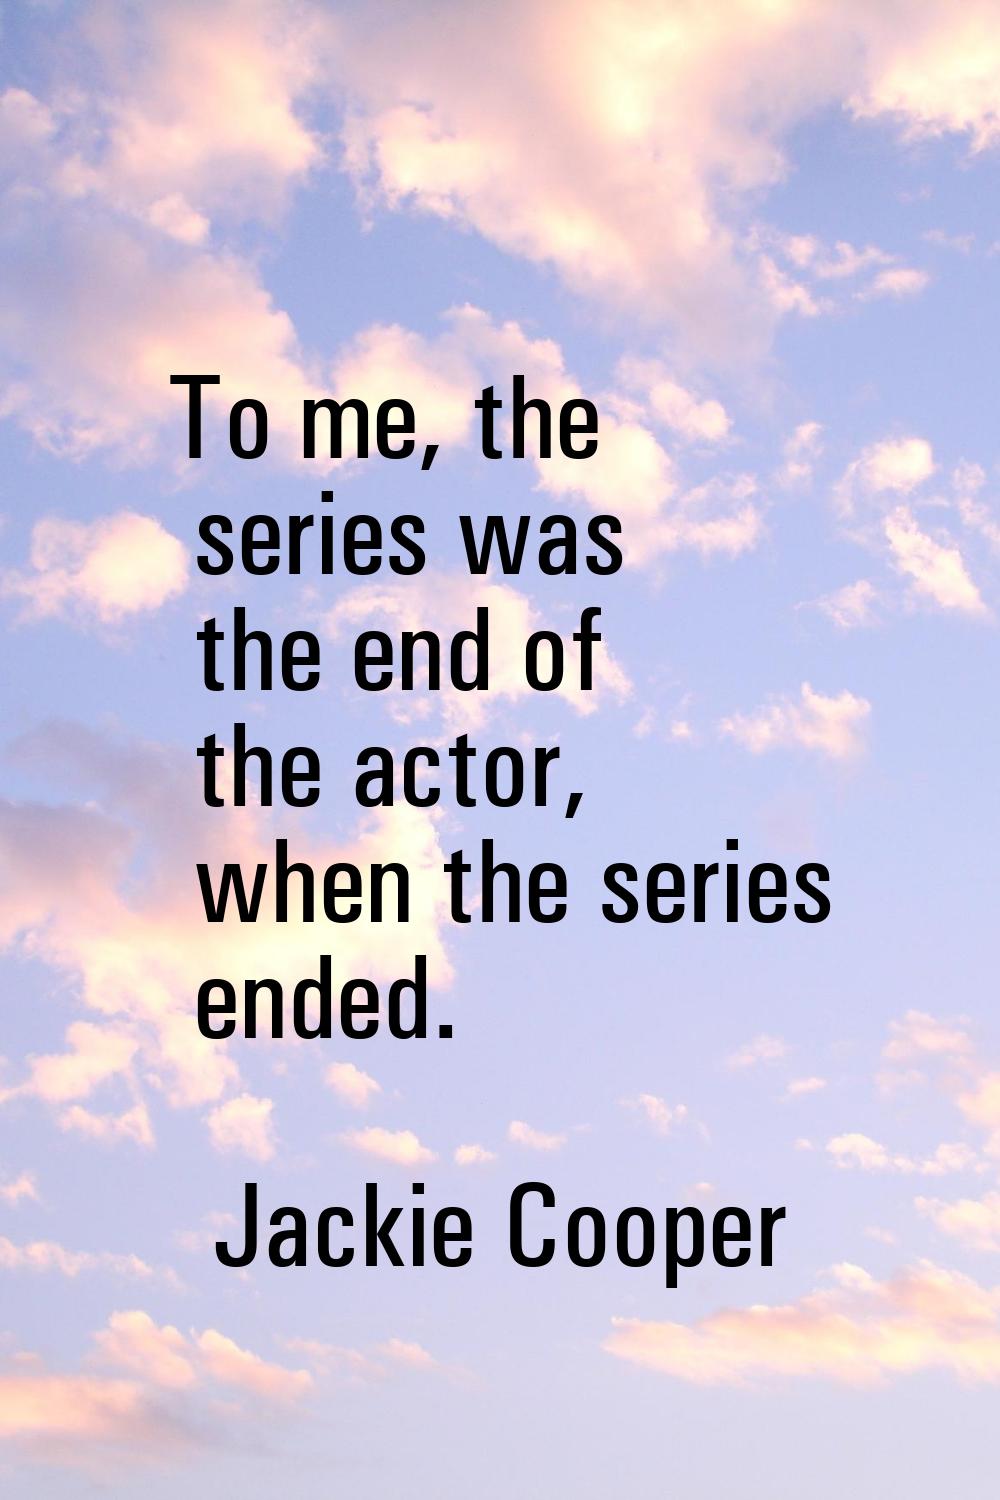 To me, the series was the end of the actor, when the series ended.